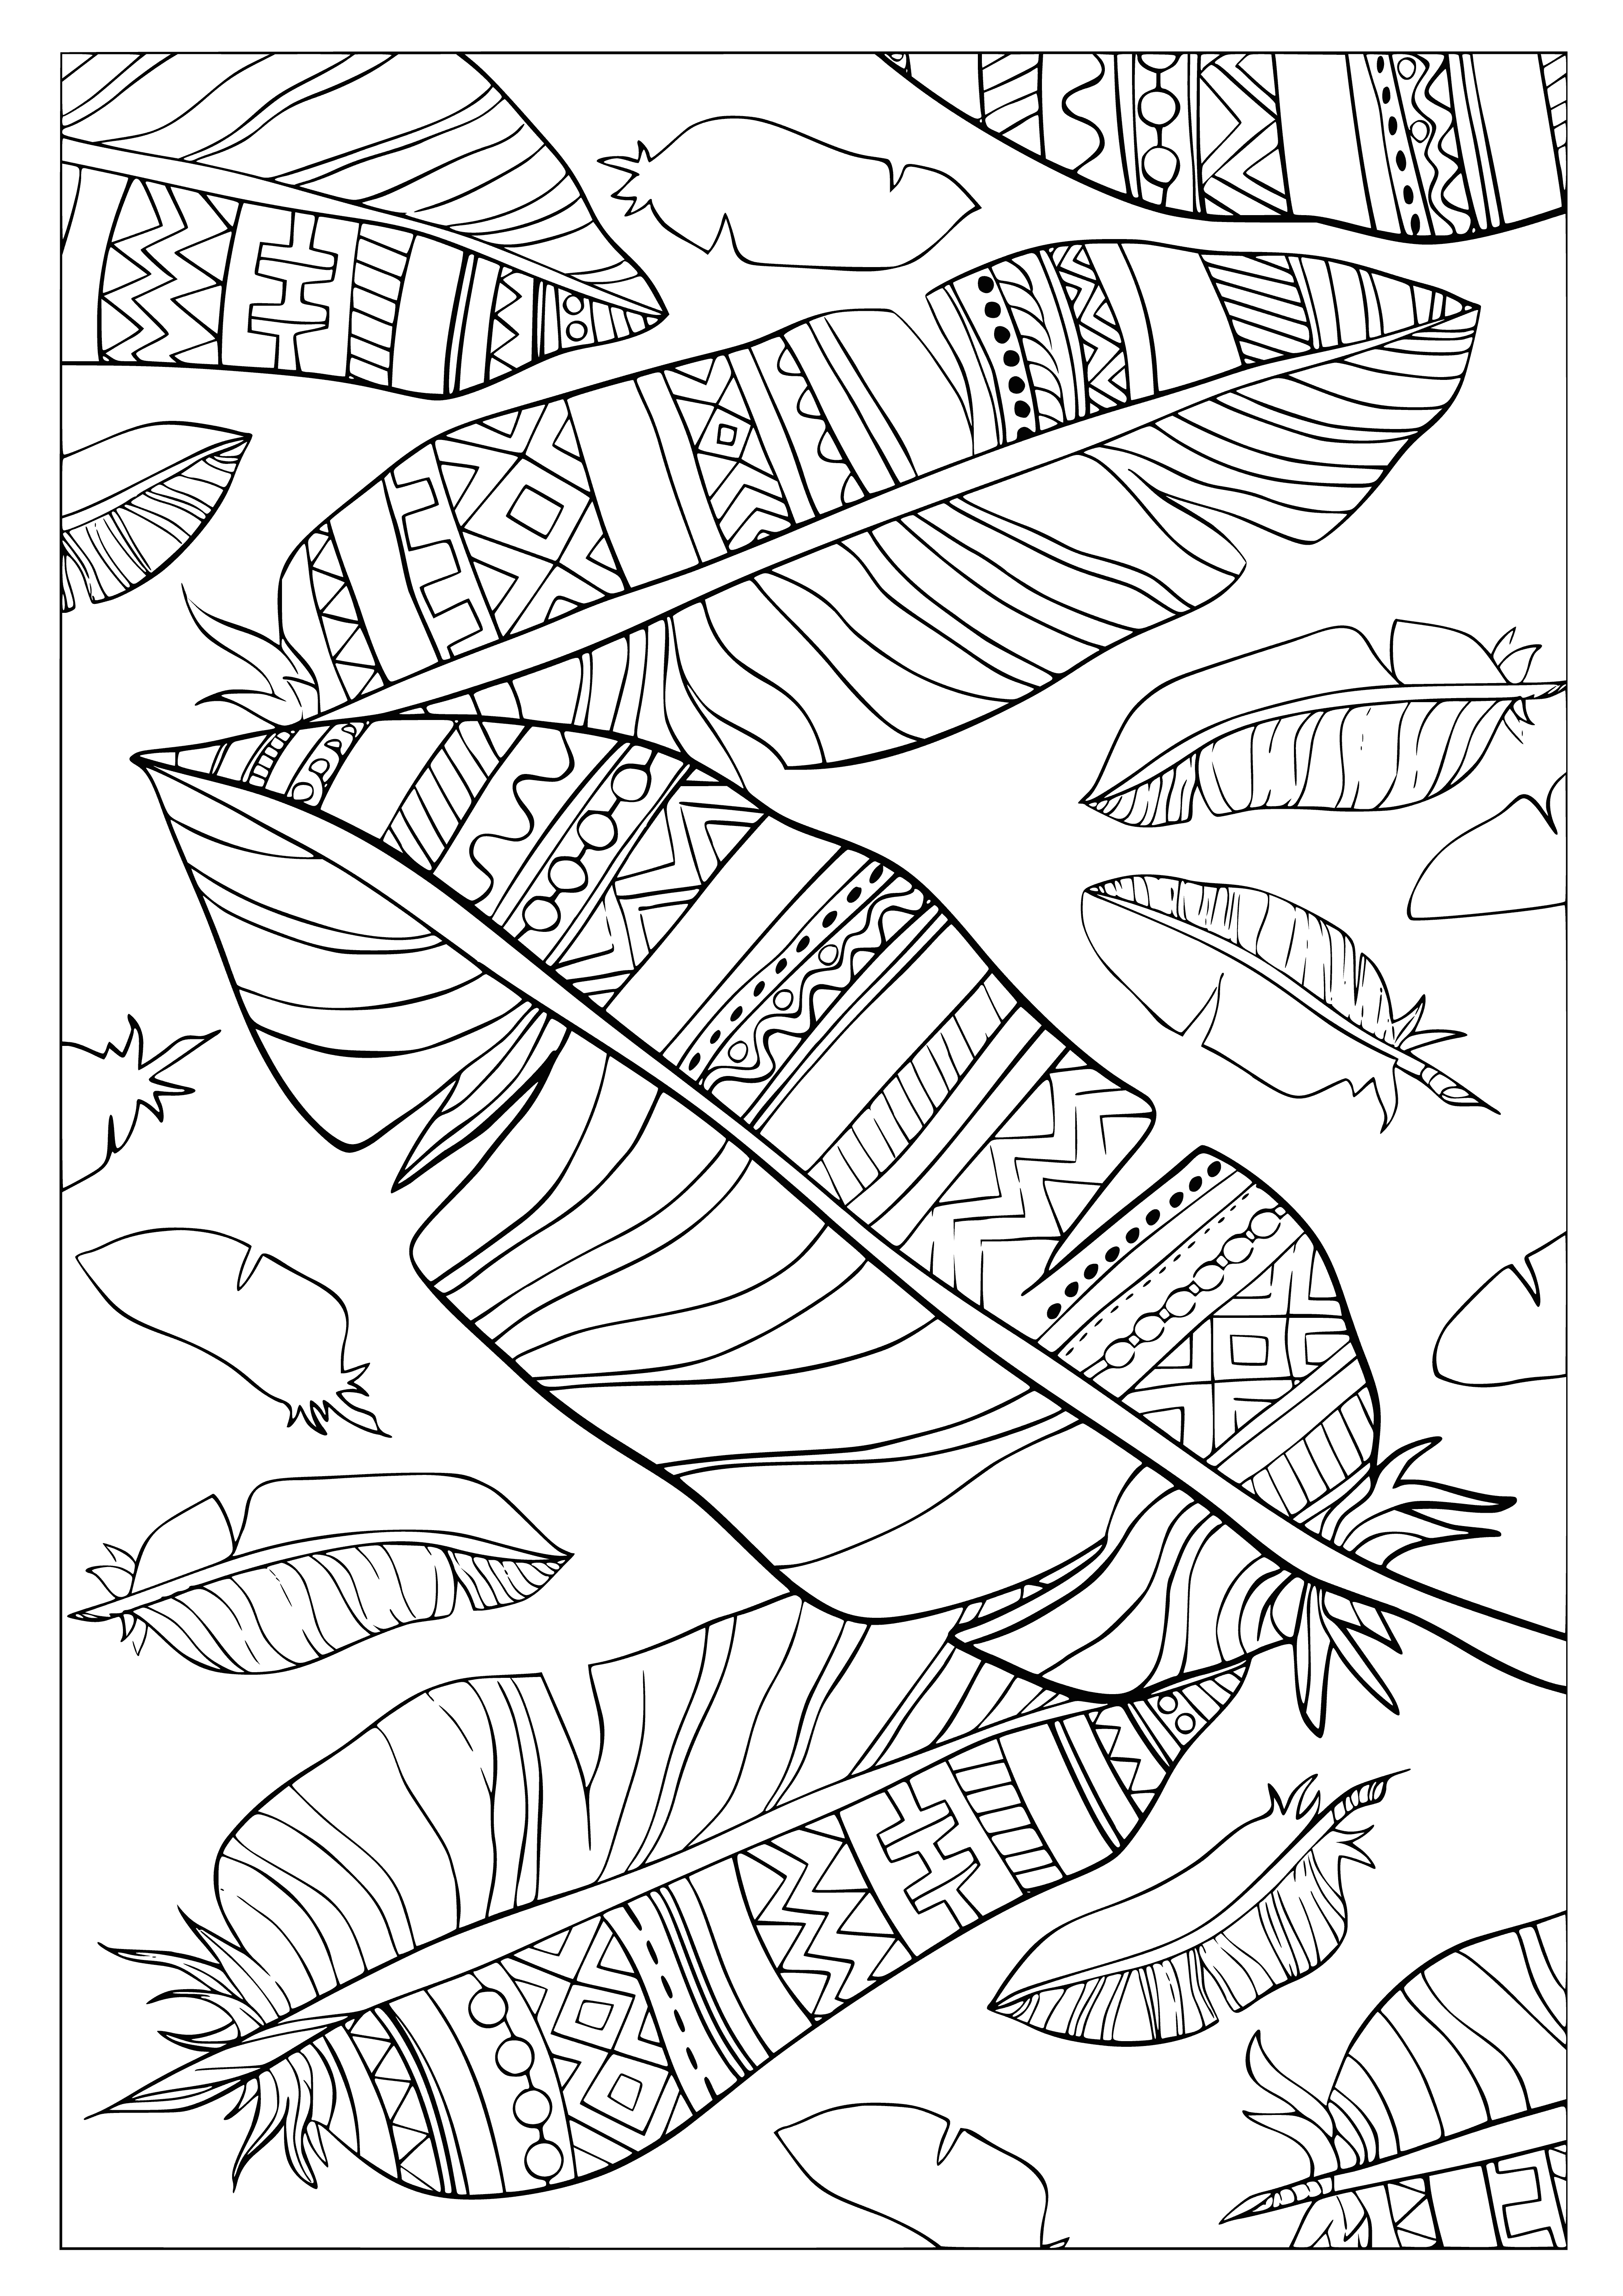 coloring page: Two birds sit on a branch, feathers fluttering while a gradient of blues and greens form the backdrop.